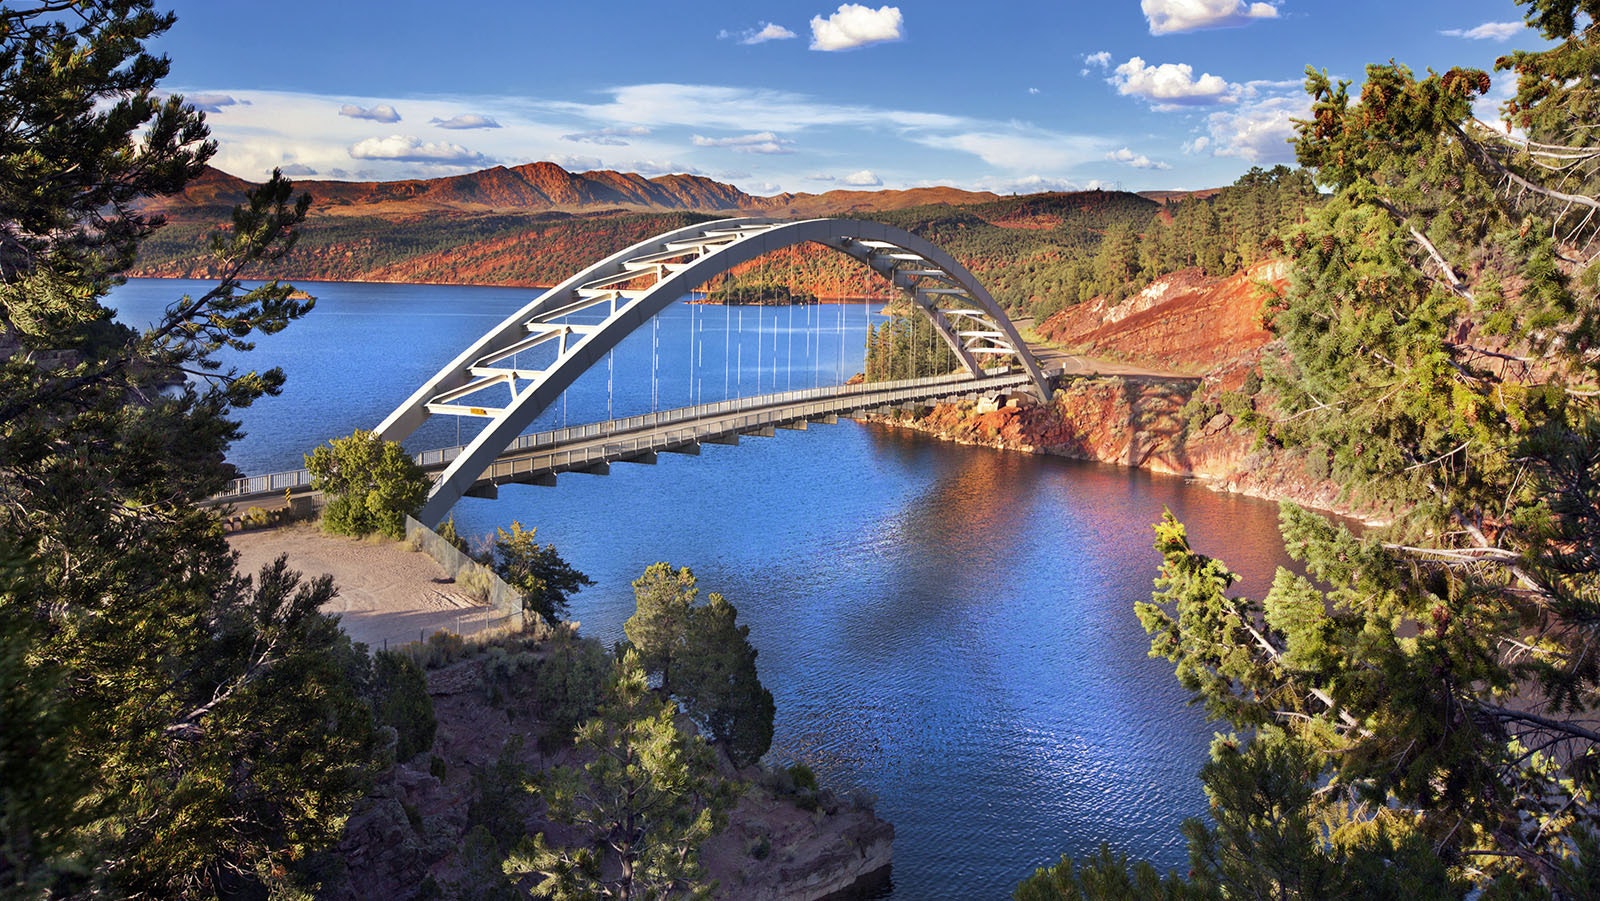 The Cart Creek Bridge has become one of the most popular places for visitors at Flaming Gorge Reservoir.